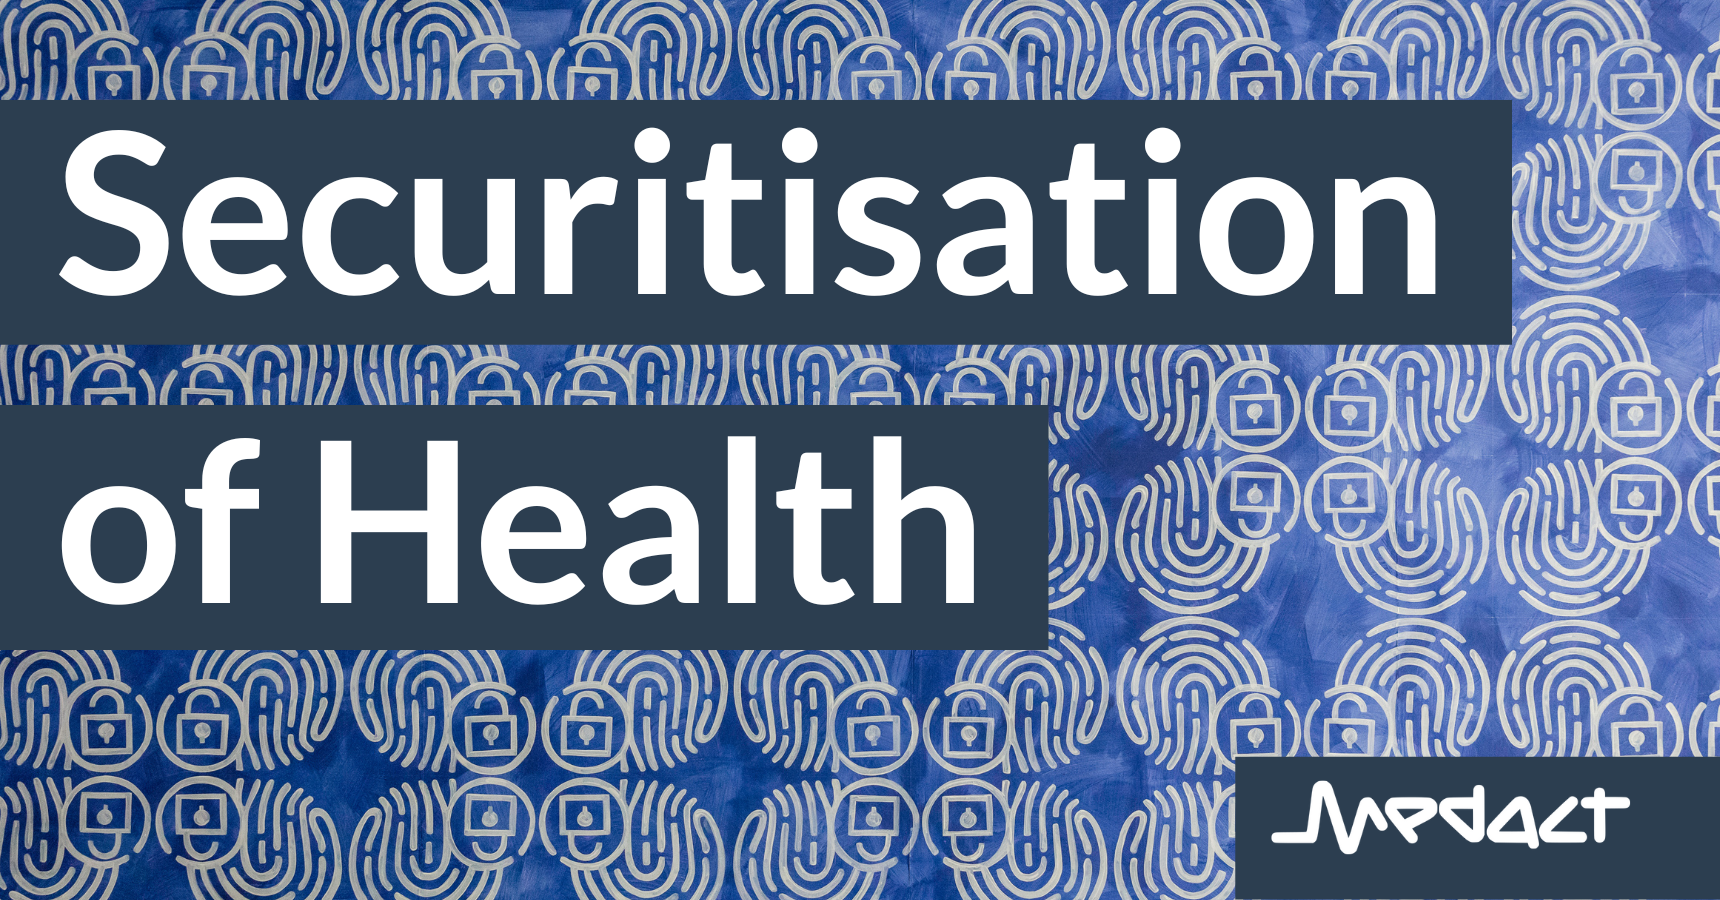 Securitisation of Health group training: Organising-centered campaigning and 1-1 conversations